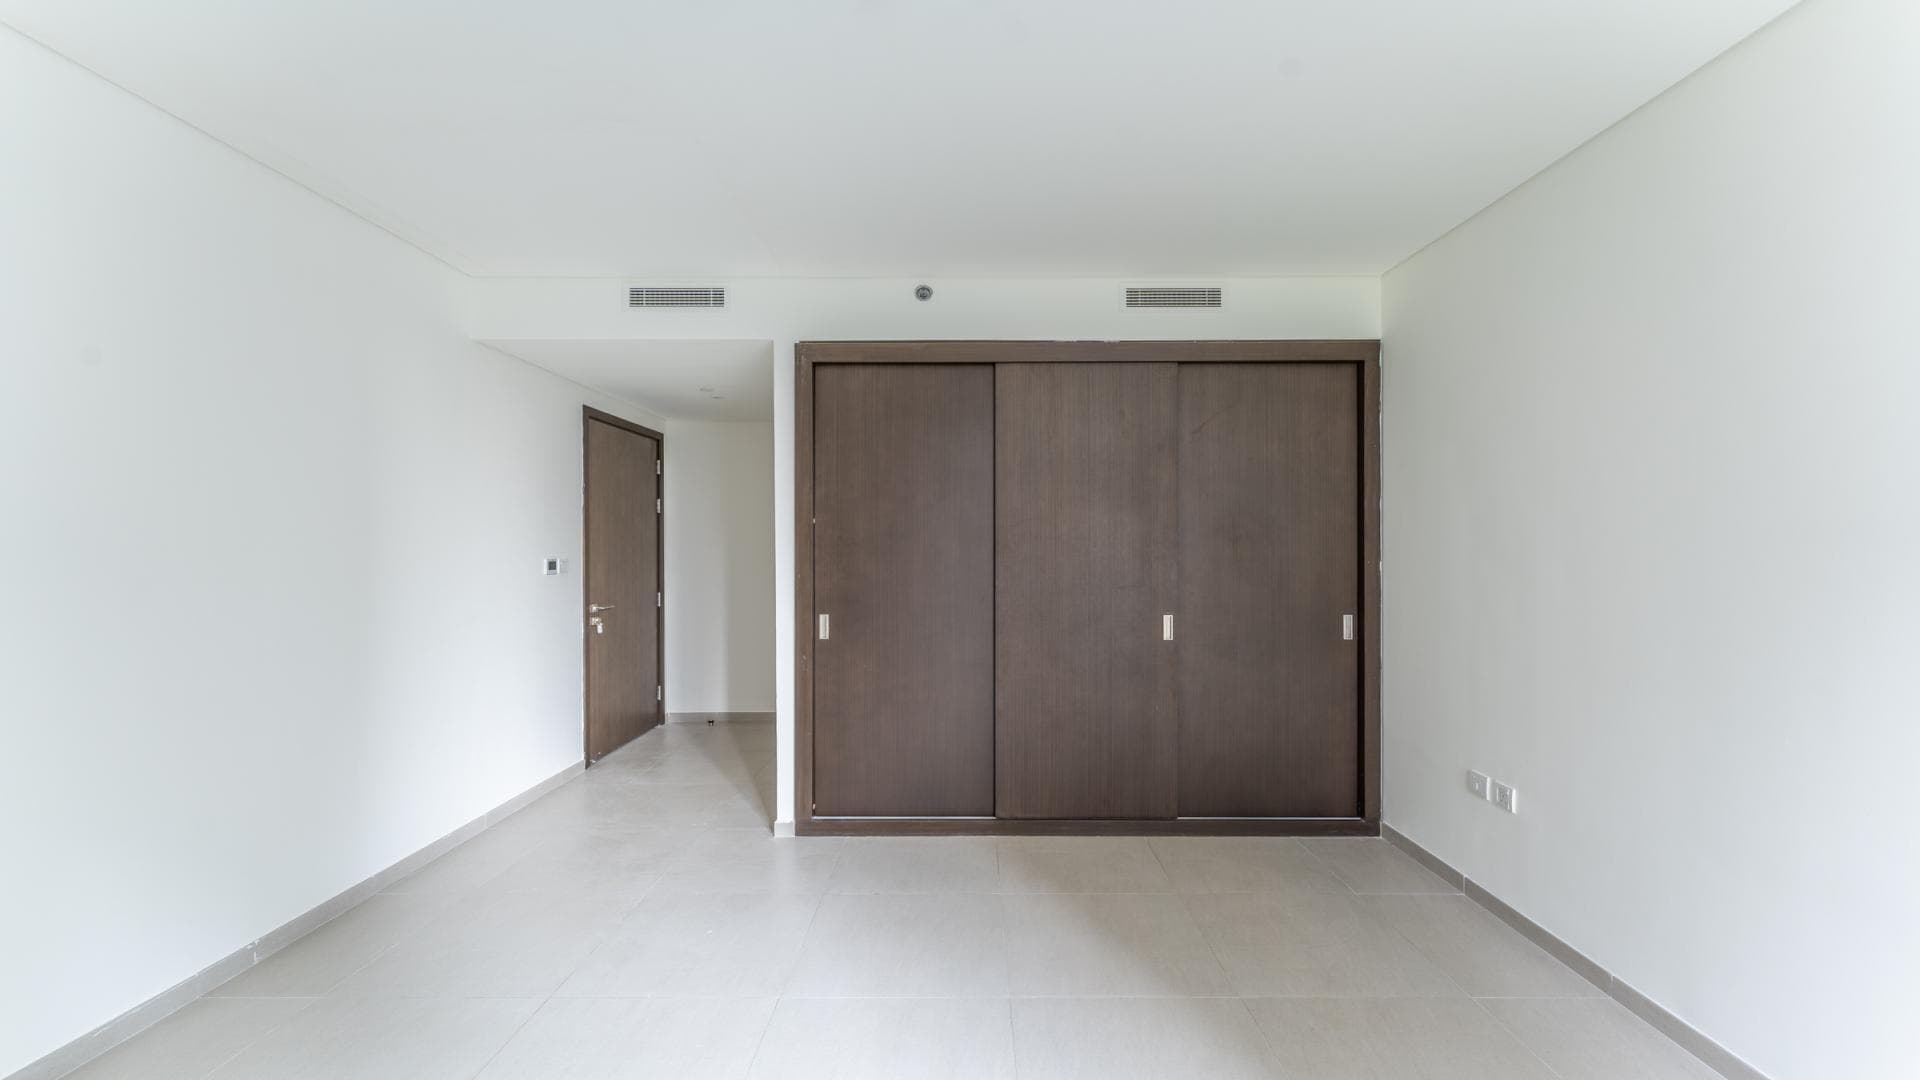 2 Bedroom Apartment For Rent West Phase Iii Lp35812 221ddbecea973400.jpg